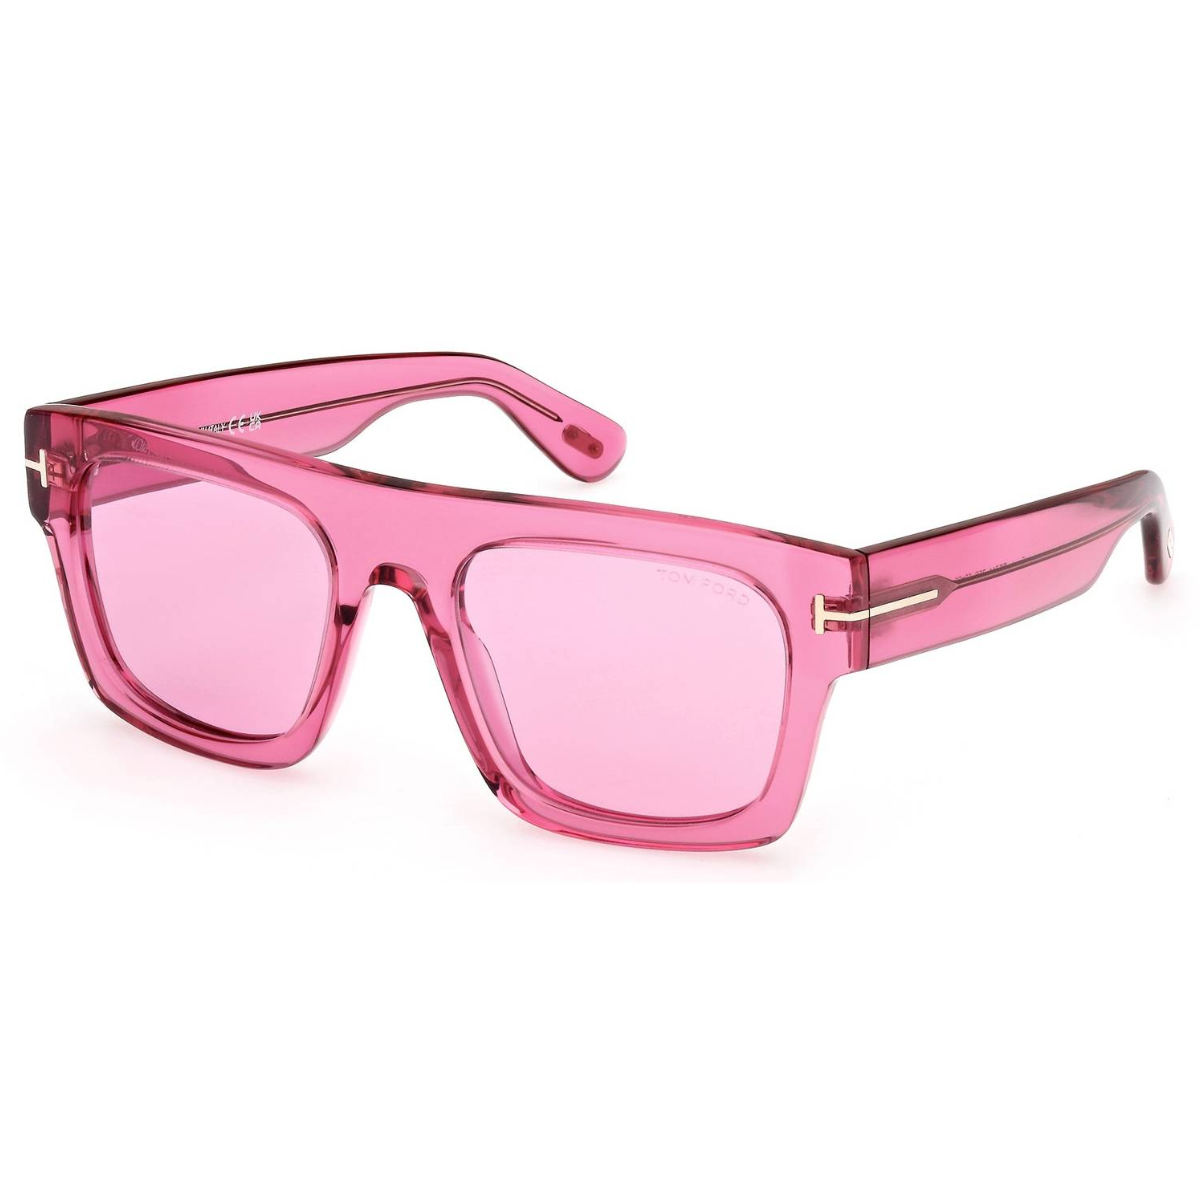 "Angle view of the Tom Ford 711 sunglasses showcasing the depth of the square frame's red color and the subtle gradient of the light pink lenses, under natural lighting."